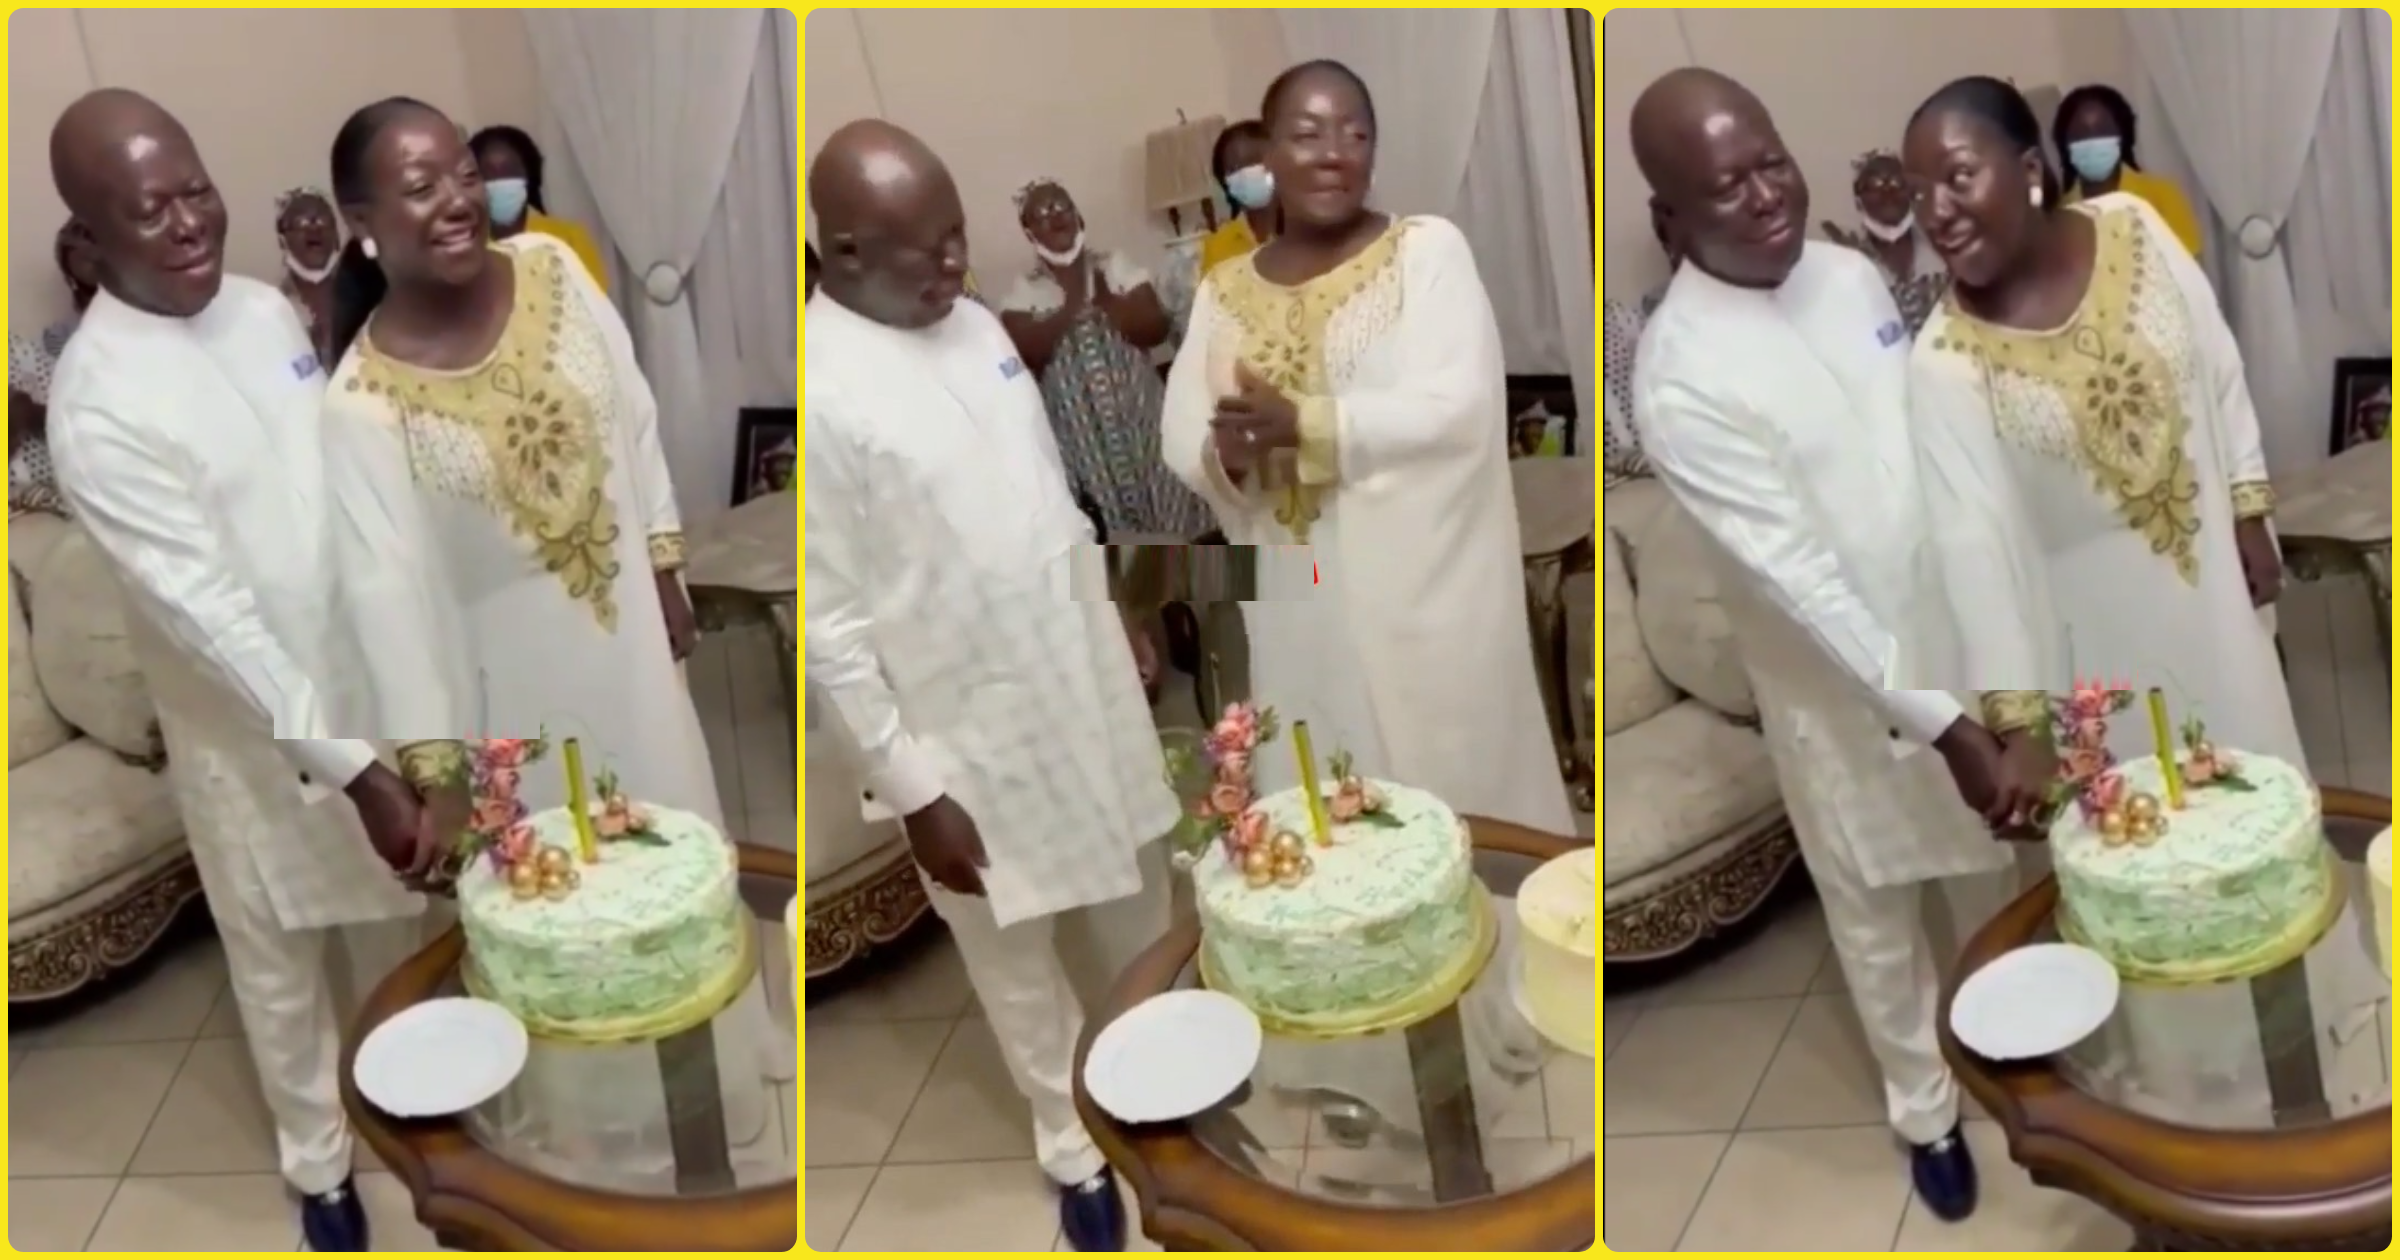 Romantic video drops: Otumfuo helps wife to cut cake as she celebrates birthday with a simple party